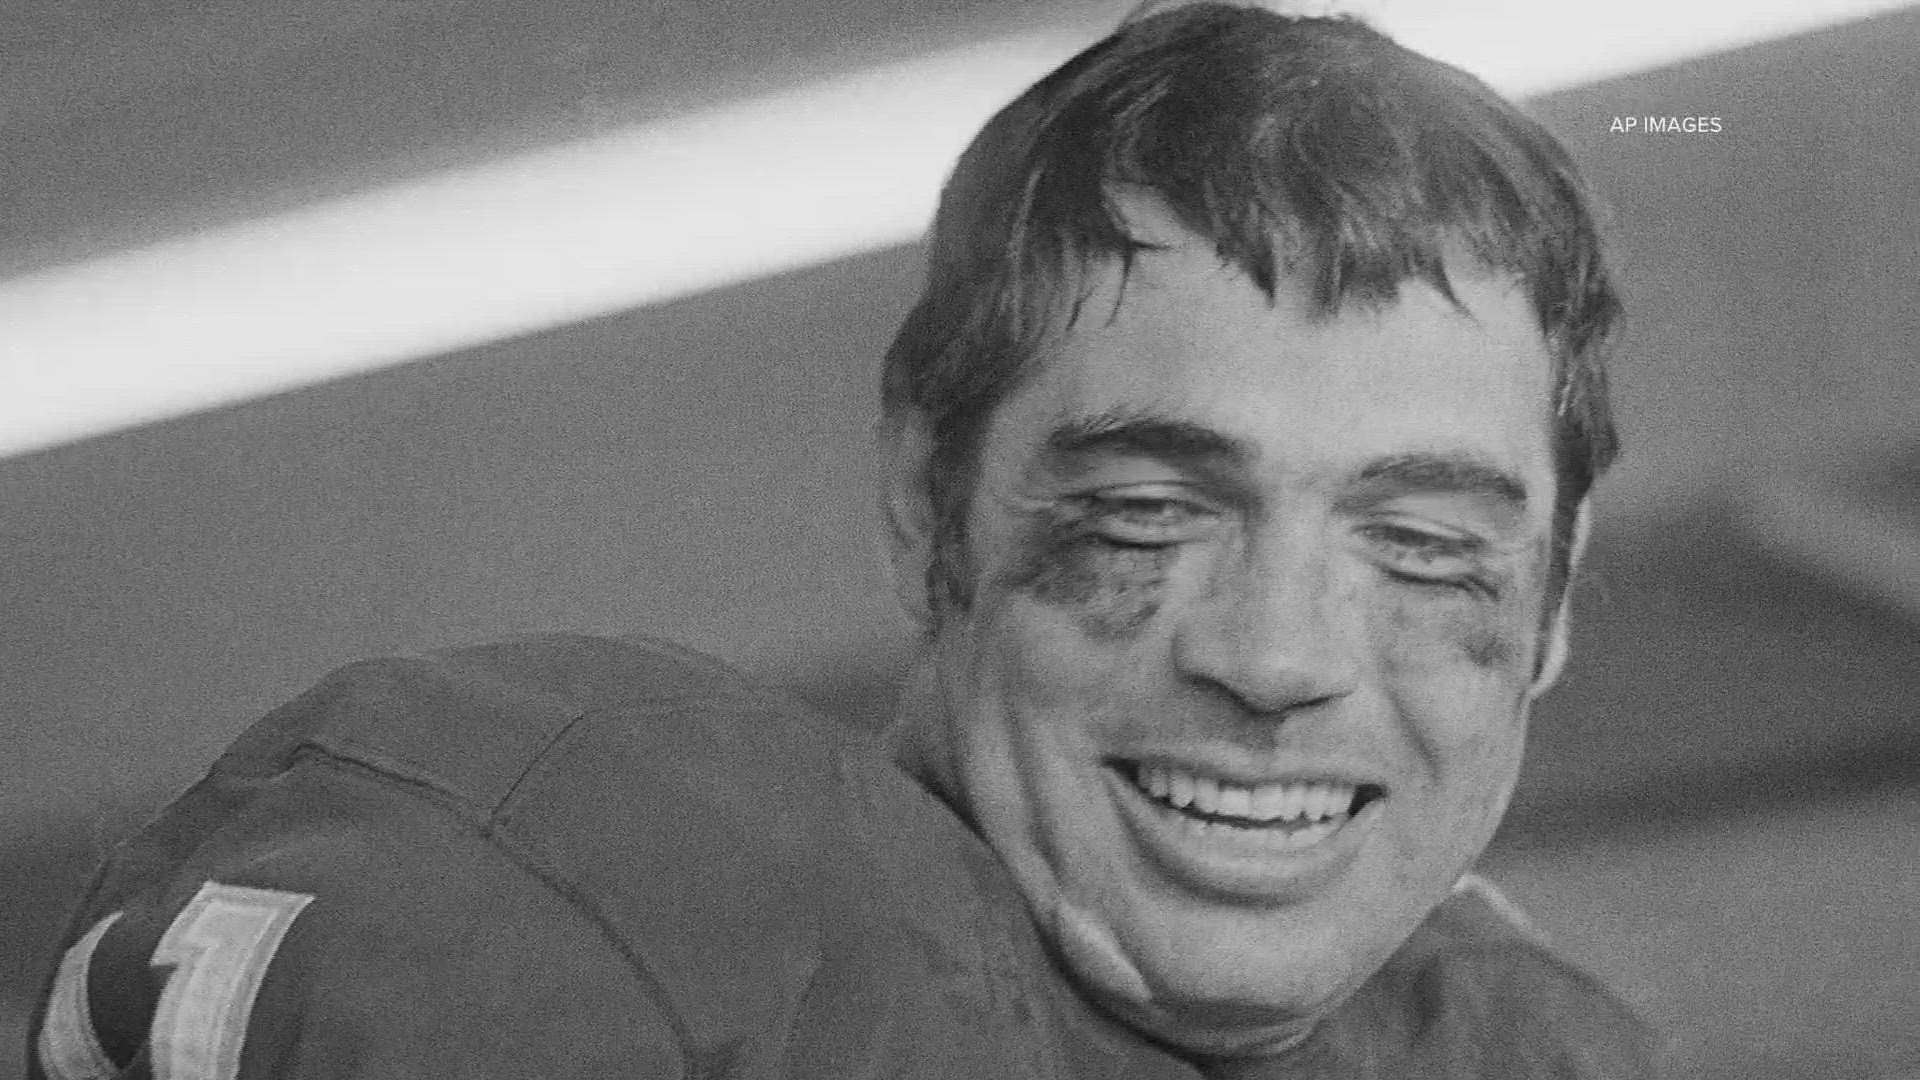 Kapp, who led the Minnesota Vikings to their first of four Super Bowl appearances, died Monday at the age of 85.